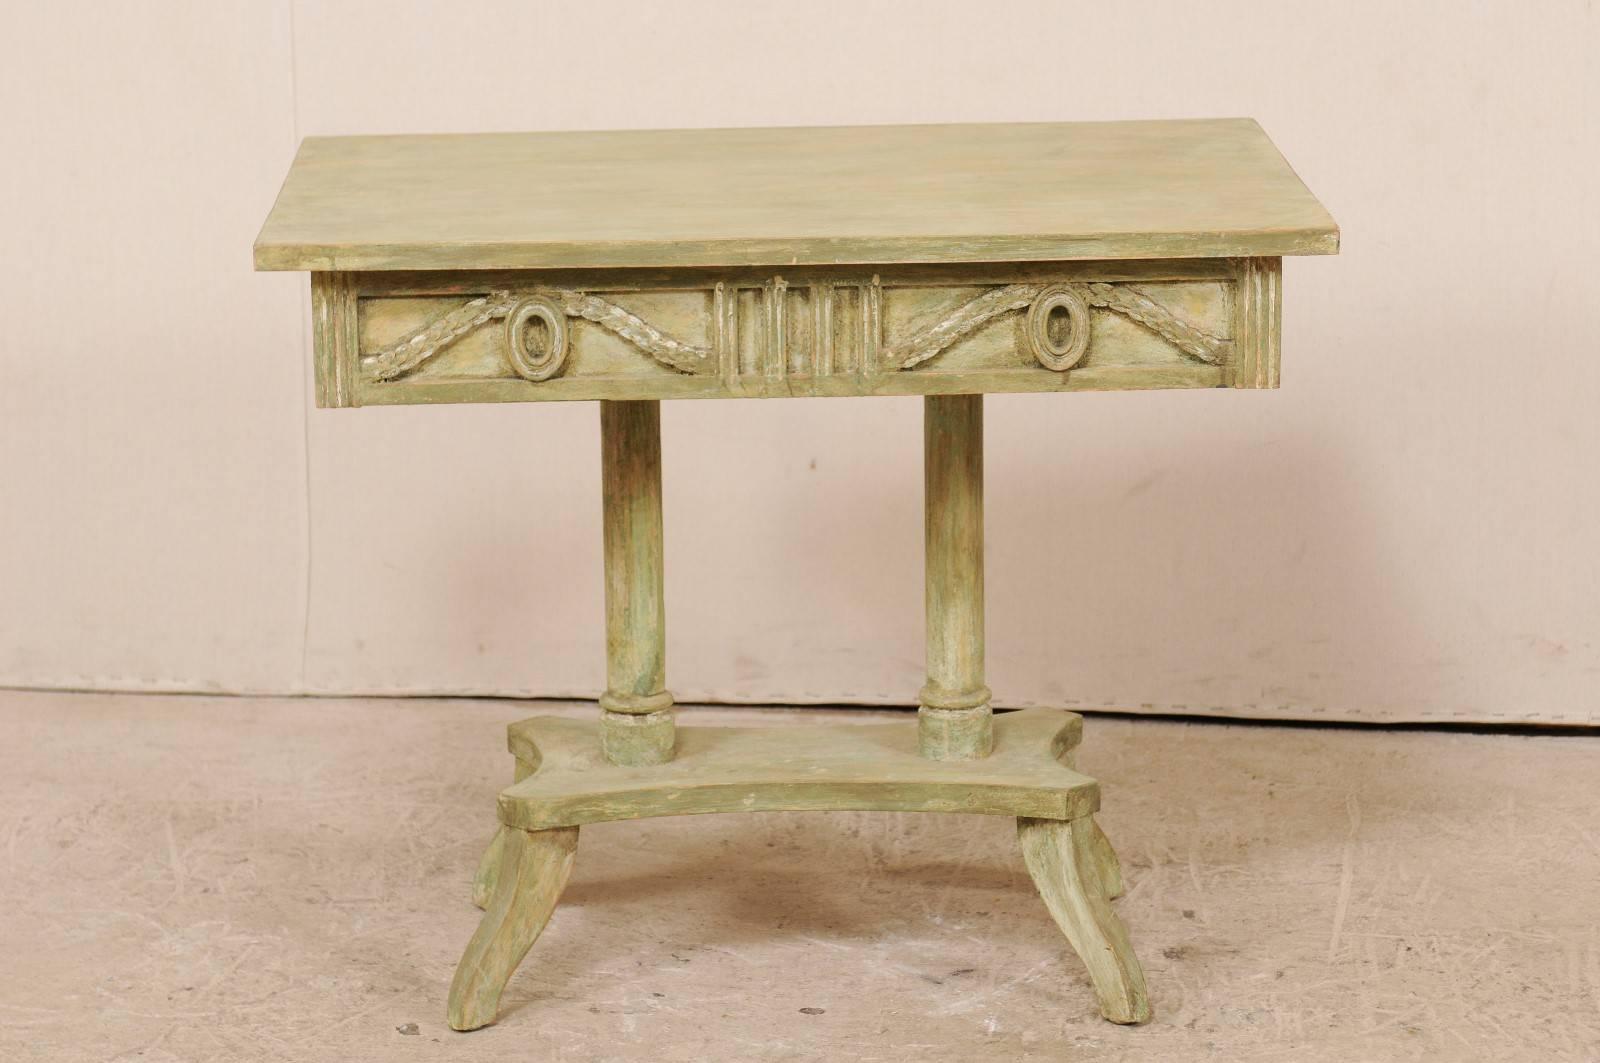 A Swedish 19th century Neoclassical painted wood Lindome style table. This antique Swedish console table features a richly decorated apron with leaved swags and wreaths, a rectangular-shaped top, and two column central pedestal style base. The